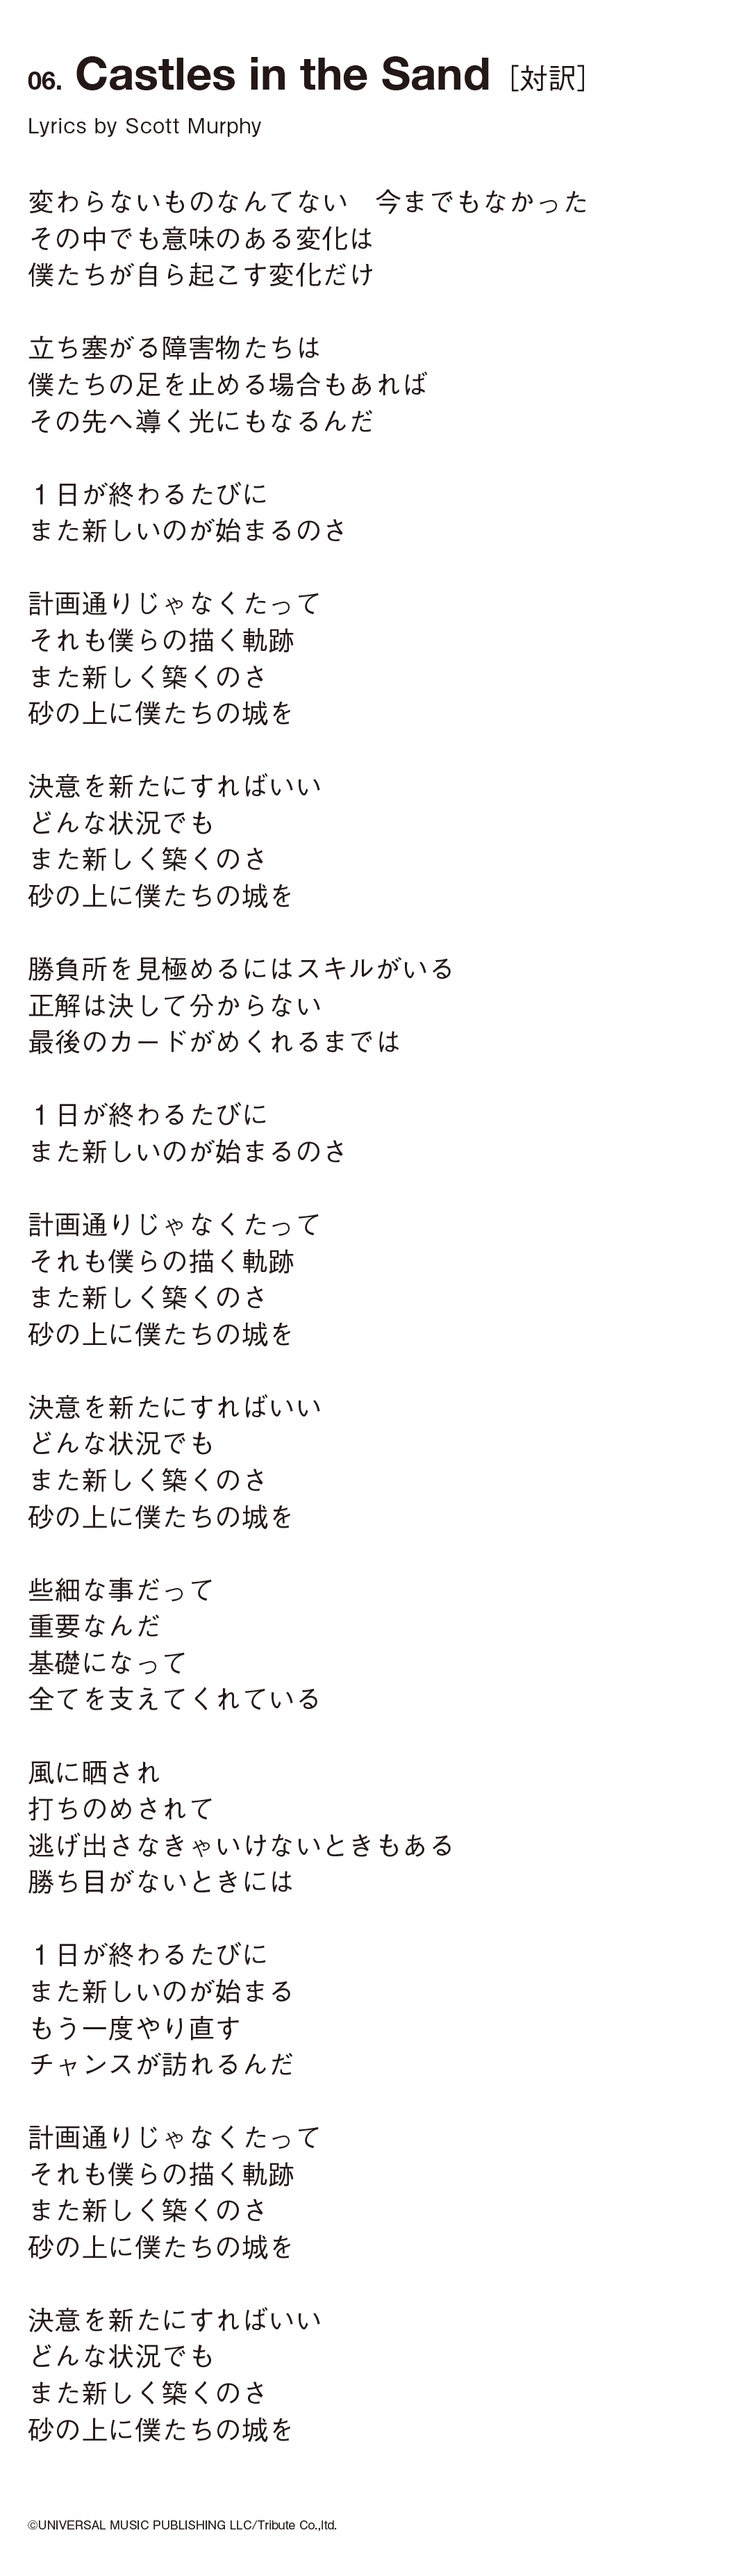 「Castles in the Sand」歌詞対訳